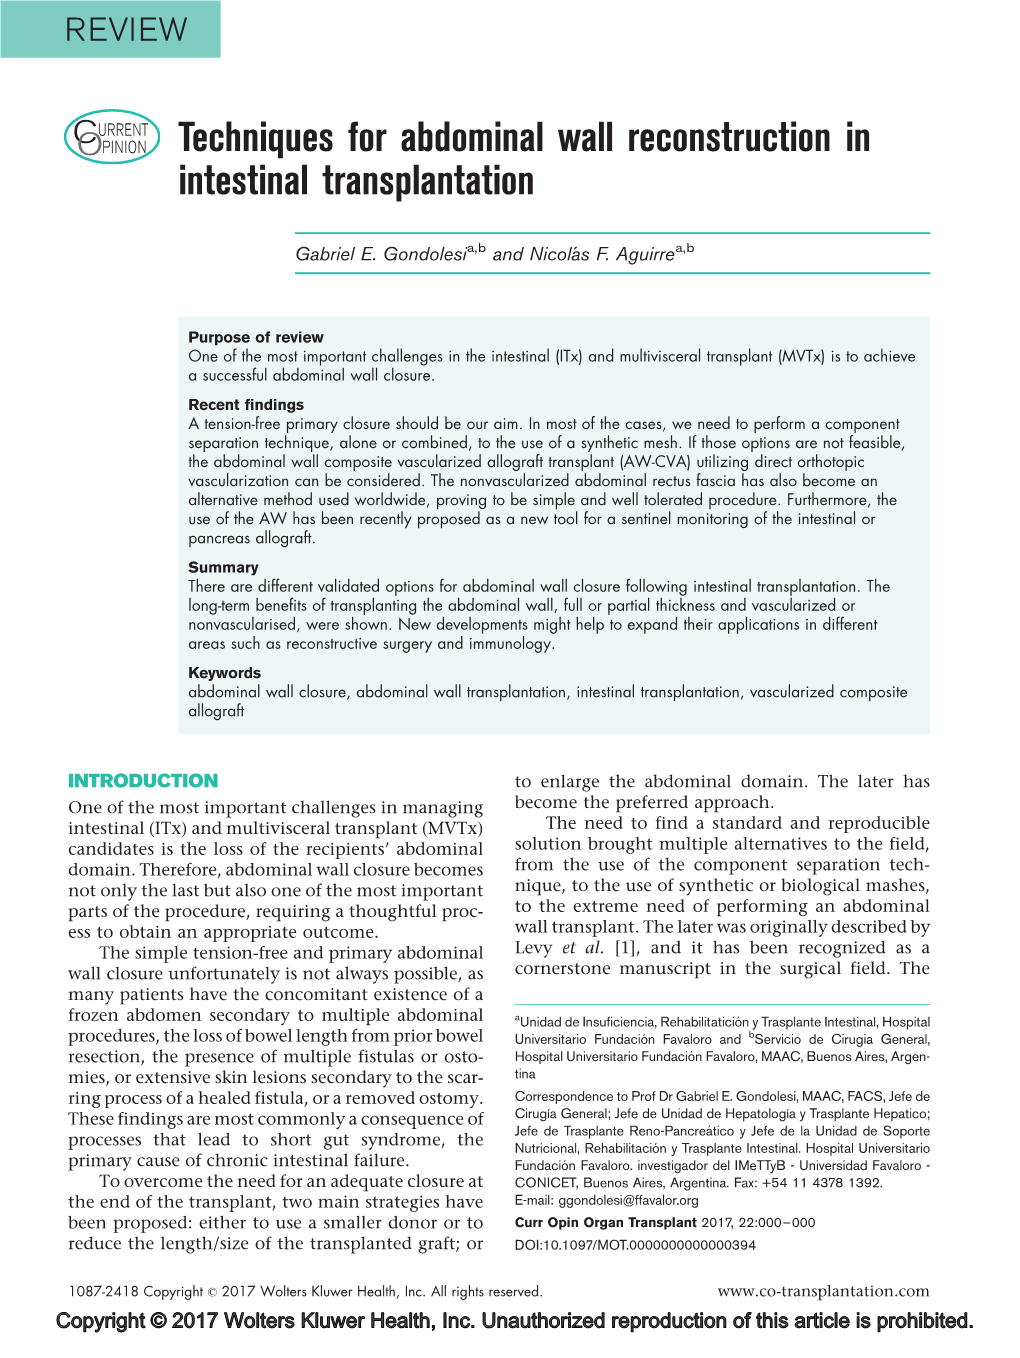 Techniques for Abdominal Wall Reconstruction in Intestinal Transplantation